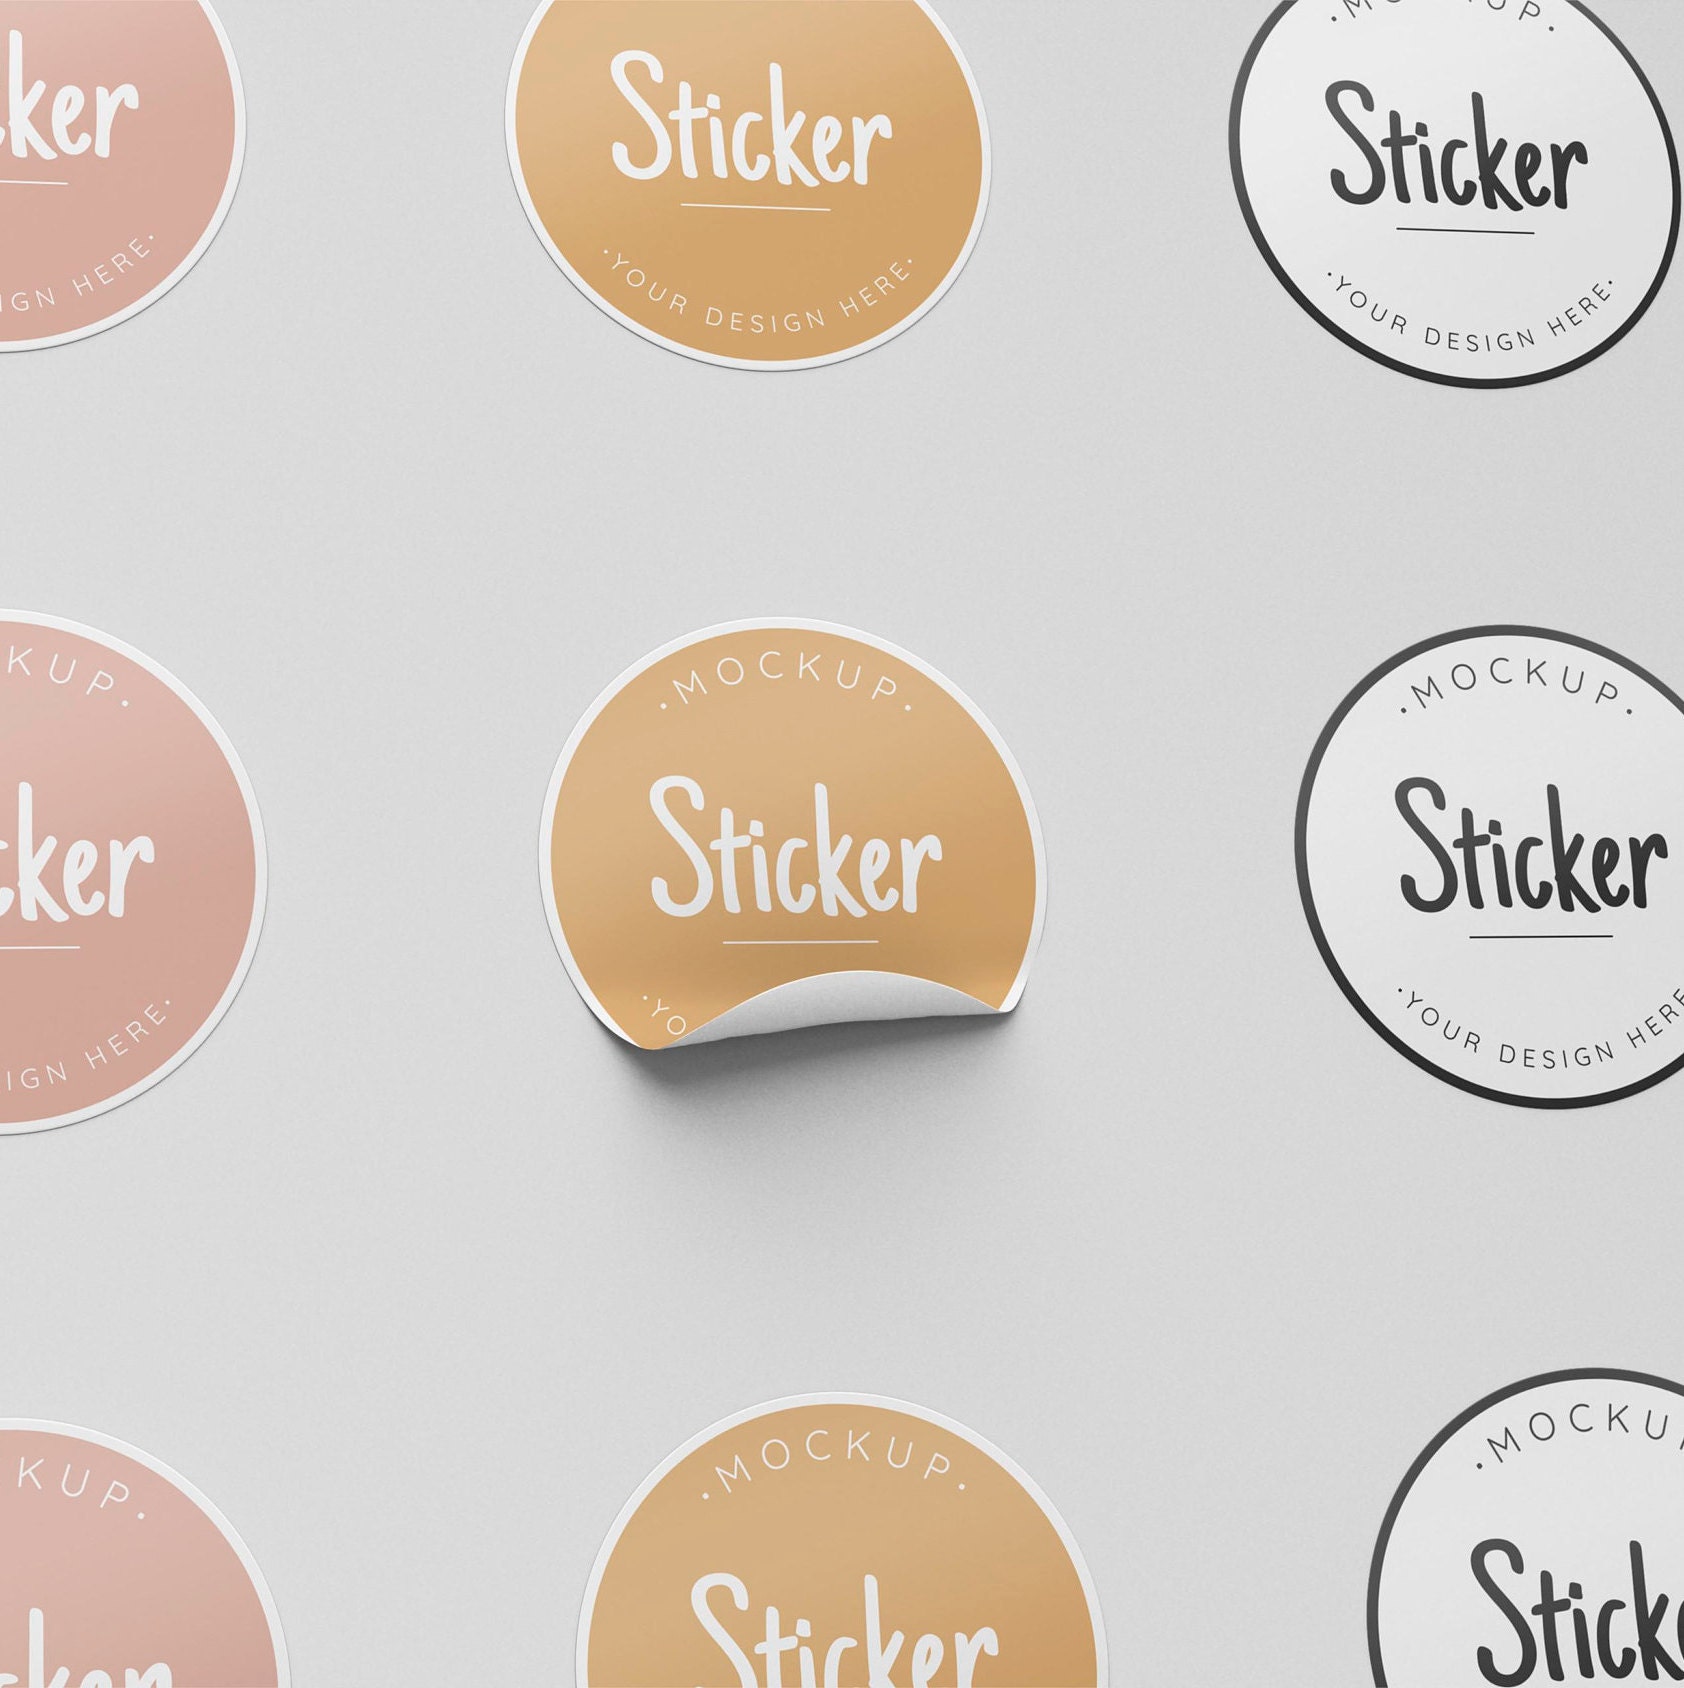 Custom Stickers Label Stickers - Round Personalized Labels for Busines –  Glitter Owl